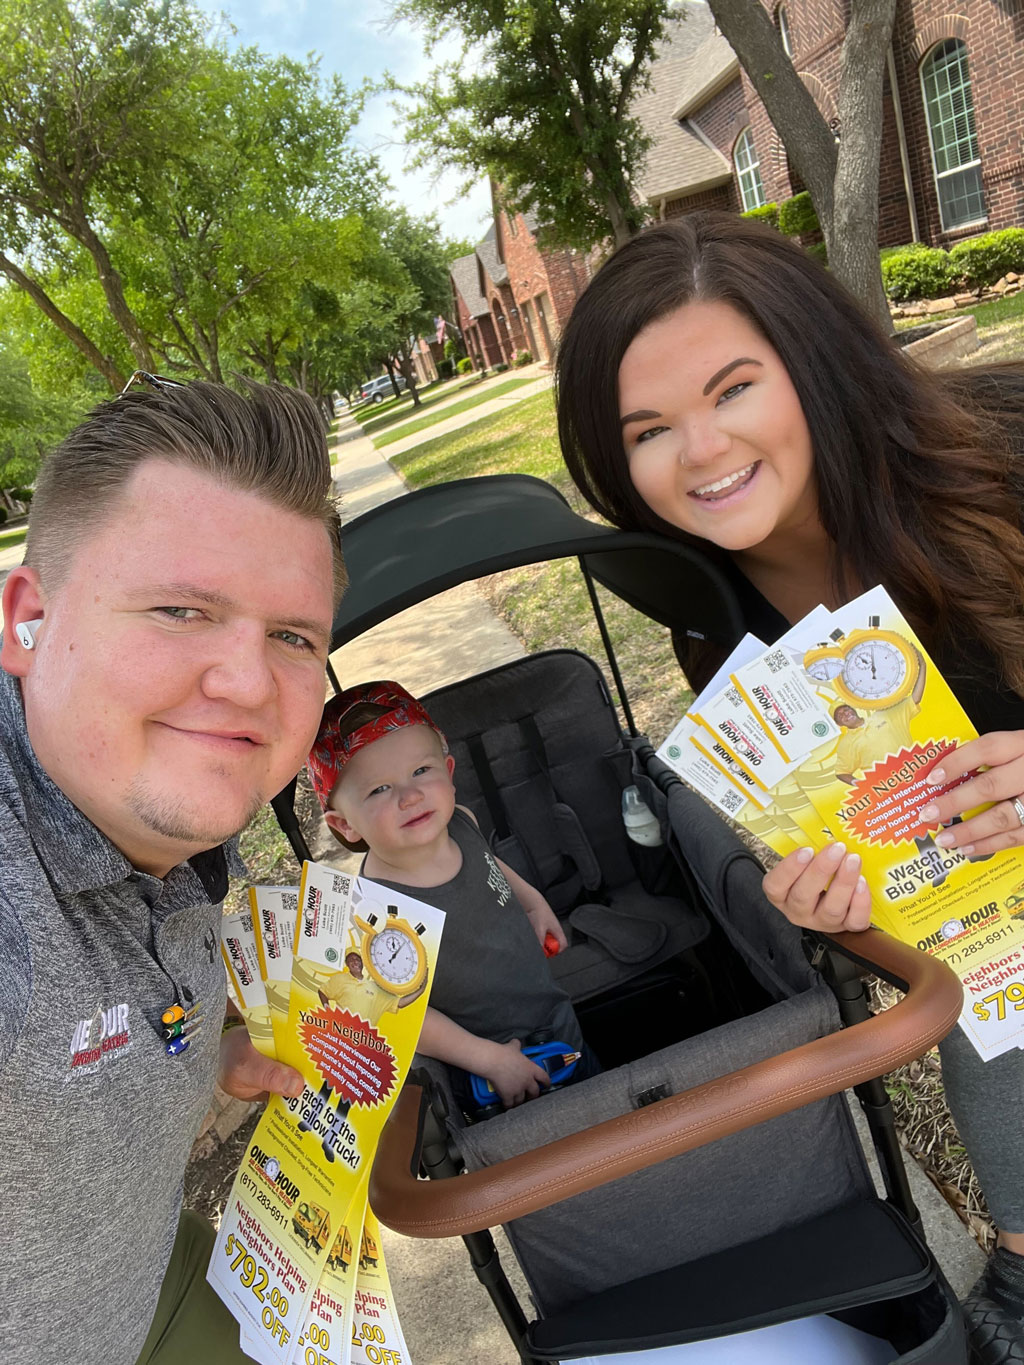 One Hour Heating and AC repair service staff and family passing out promotional material in a neighborhood. Service Dallas, Plano, Frisco, TX